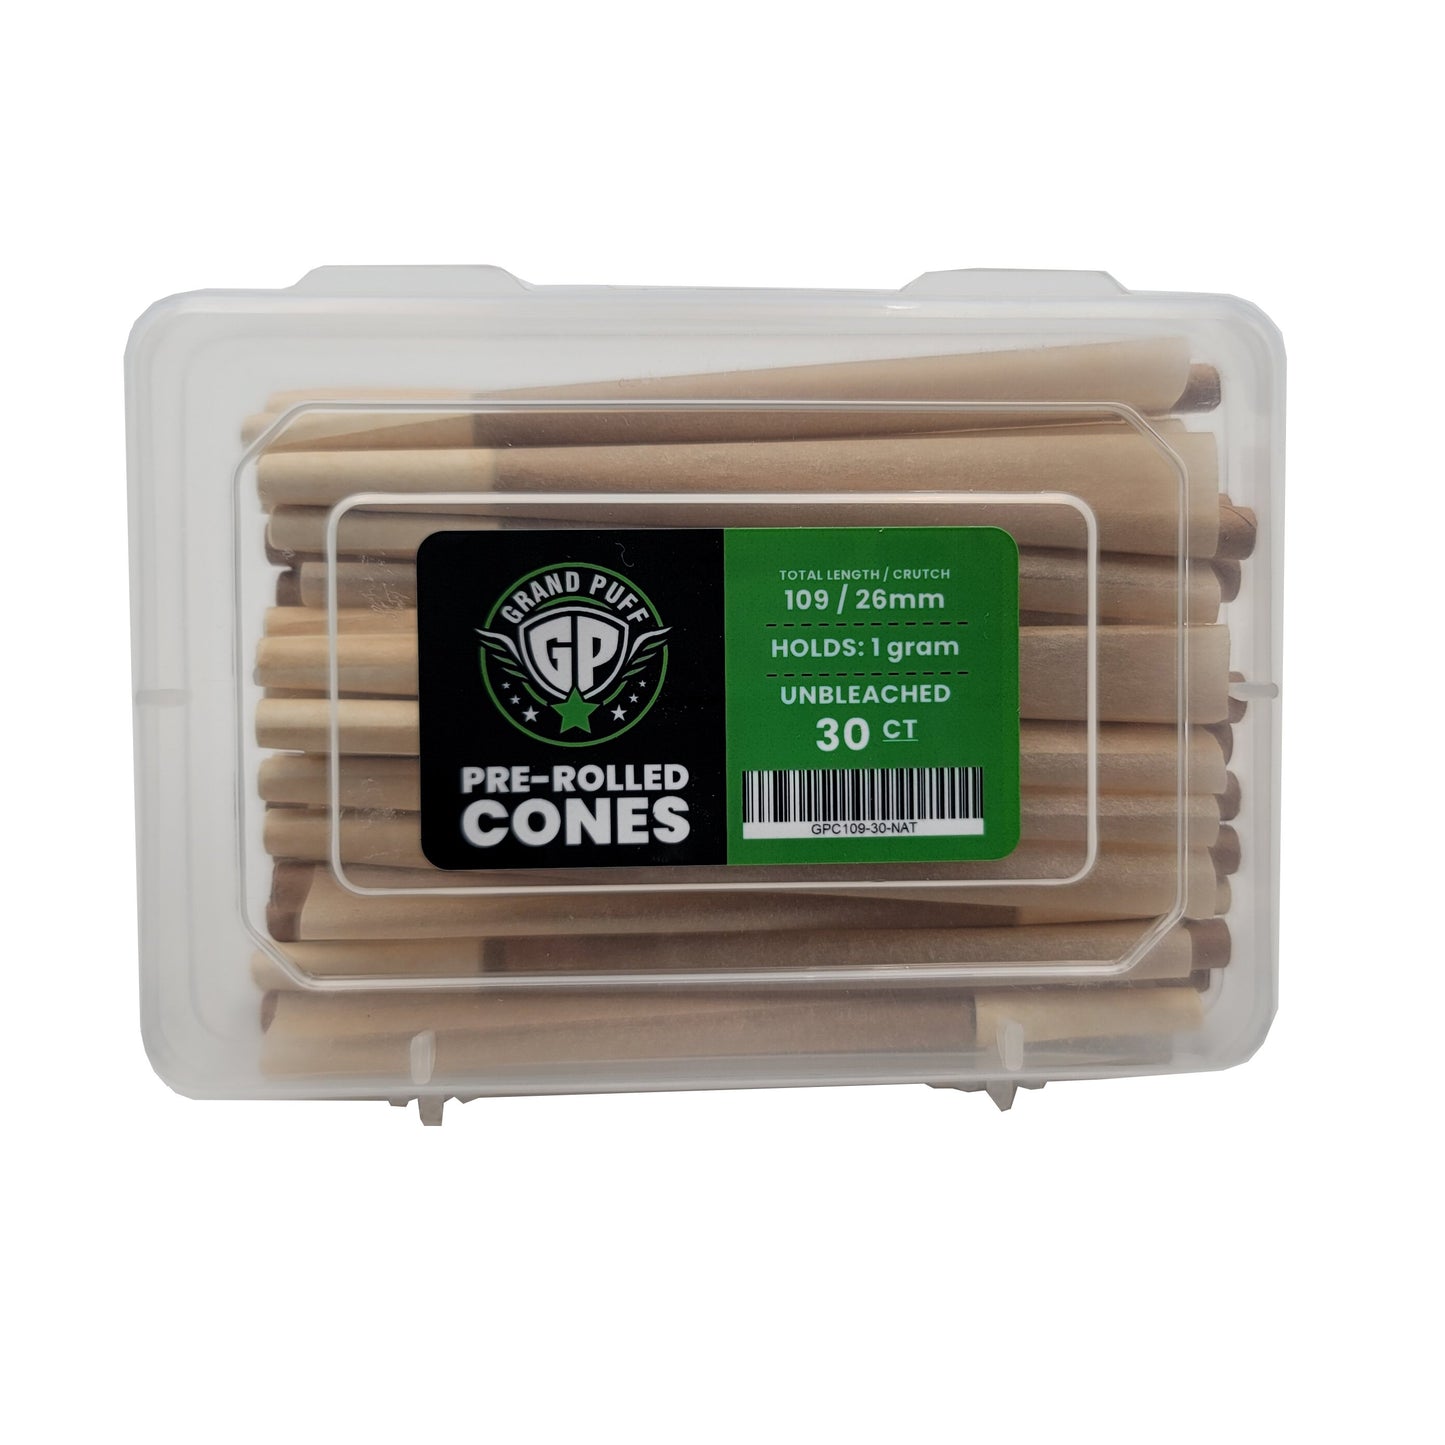 Grand Puff Premium King Size Pre-Roll Cones (109mm / 26mm filter) | Box of 30 Unbleached Natural